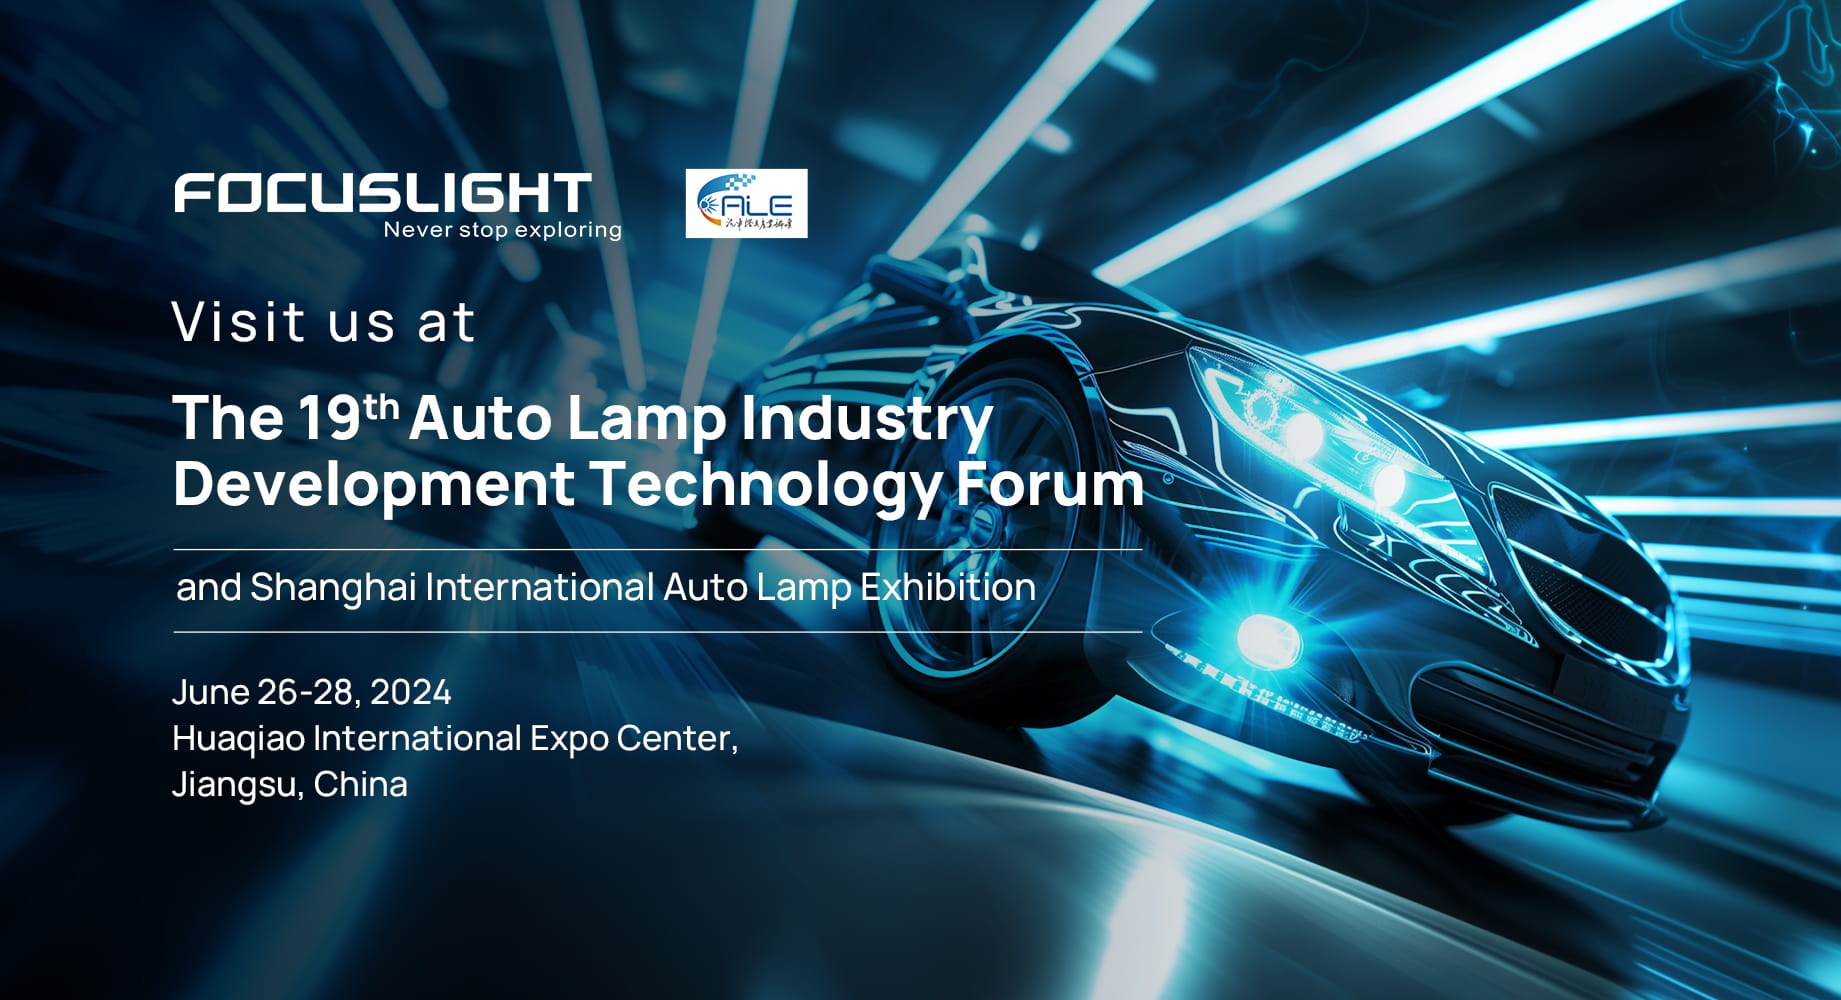 Focuslight Will Be Exhibiting at The 19th Auto Lamp Industry Development Technology Forum and Shanghai lnternational Auto Lamp Exhibition（ALE）